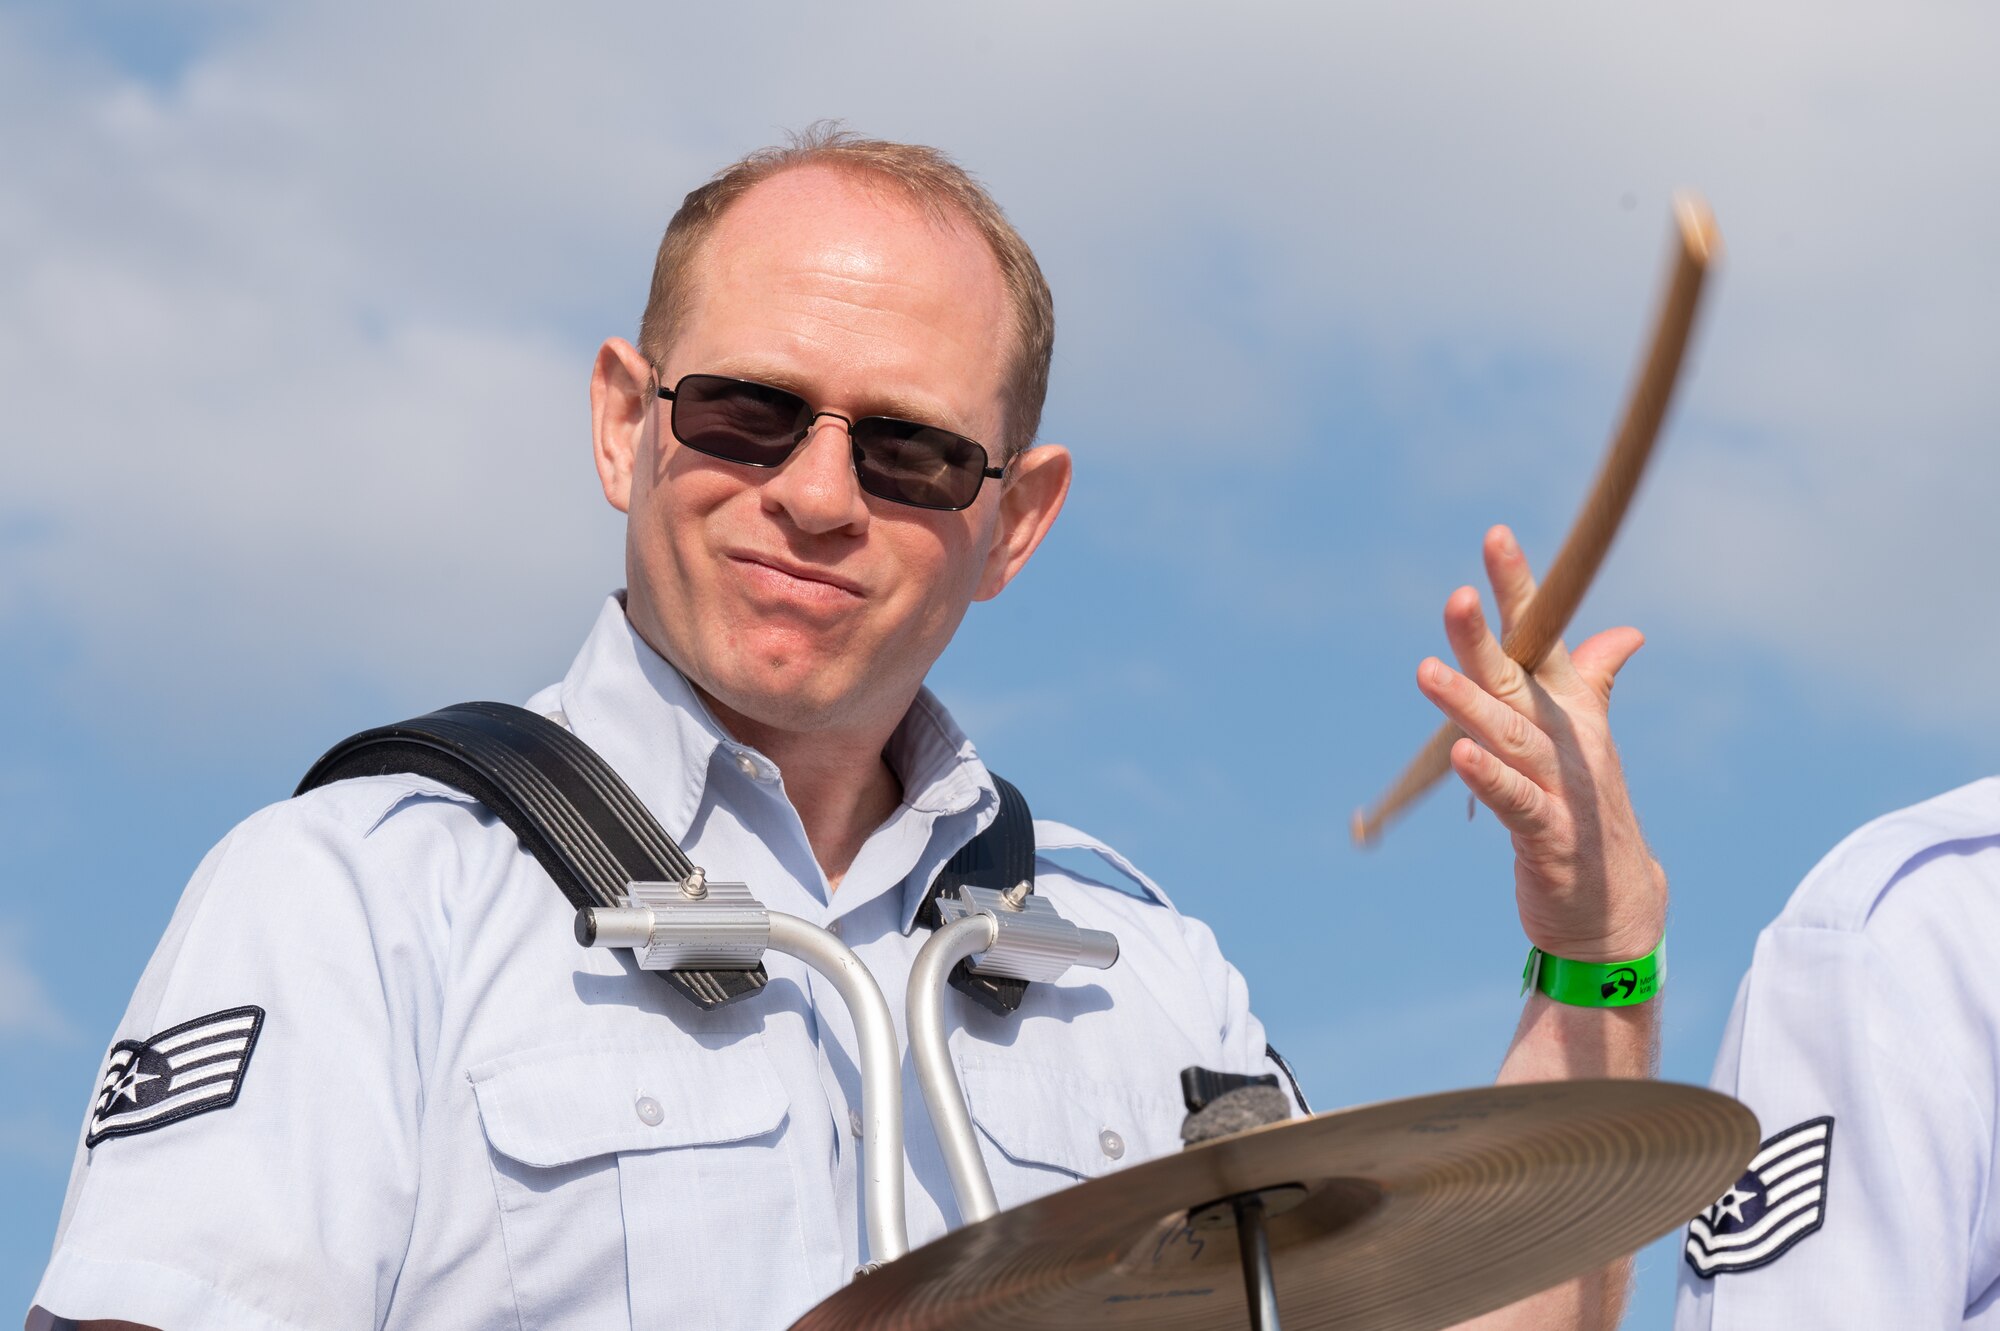 U.S. Air Force Staff Sgt. Dan Dyar, U.S. Air Forces in Europe Ceremonial Band drummer, performs during the NATO Days event at Leoš Janáček Airport in Ostrava, Czech Republic, Sept. 17, 2023.